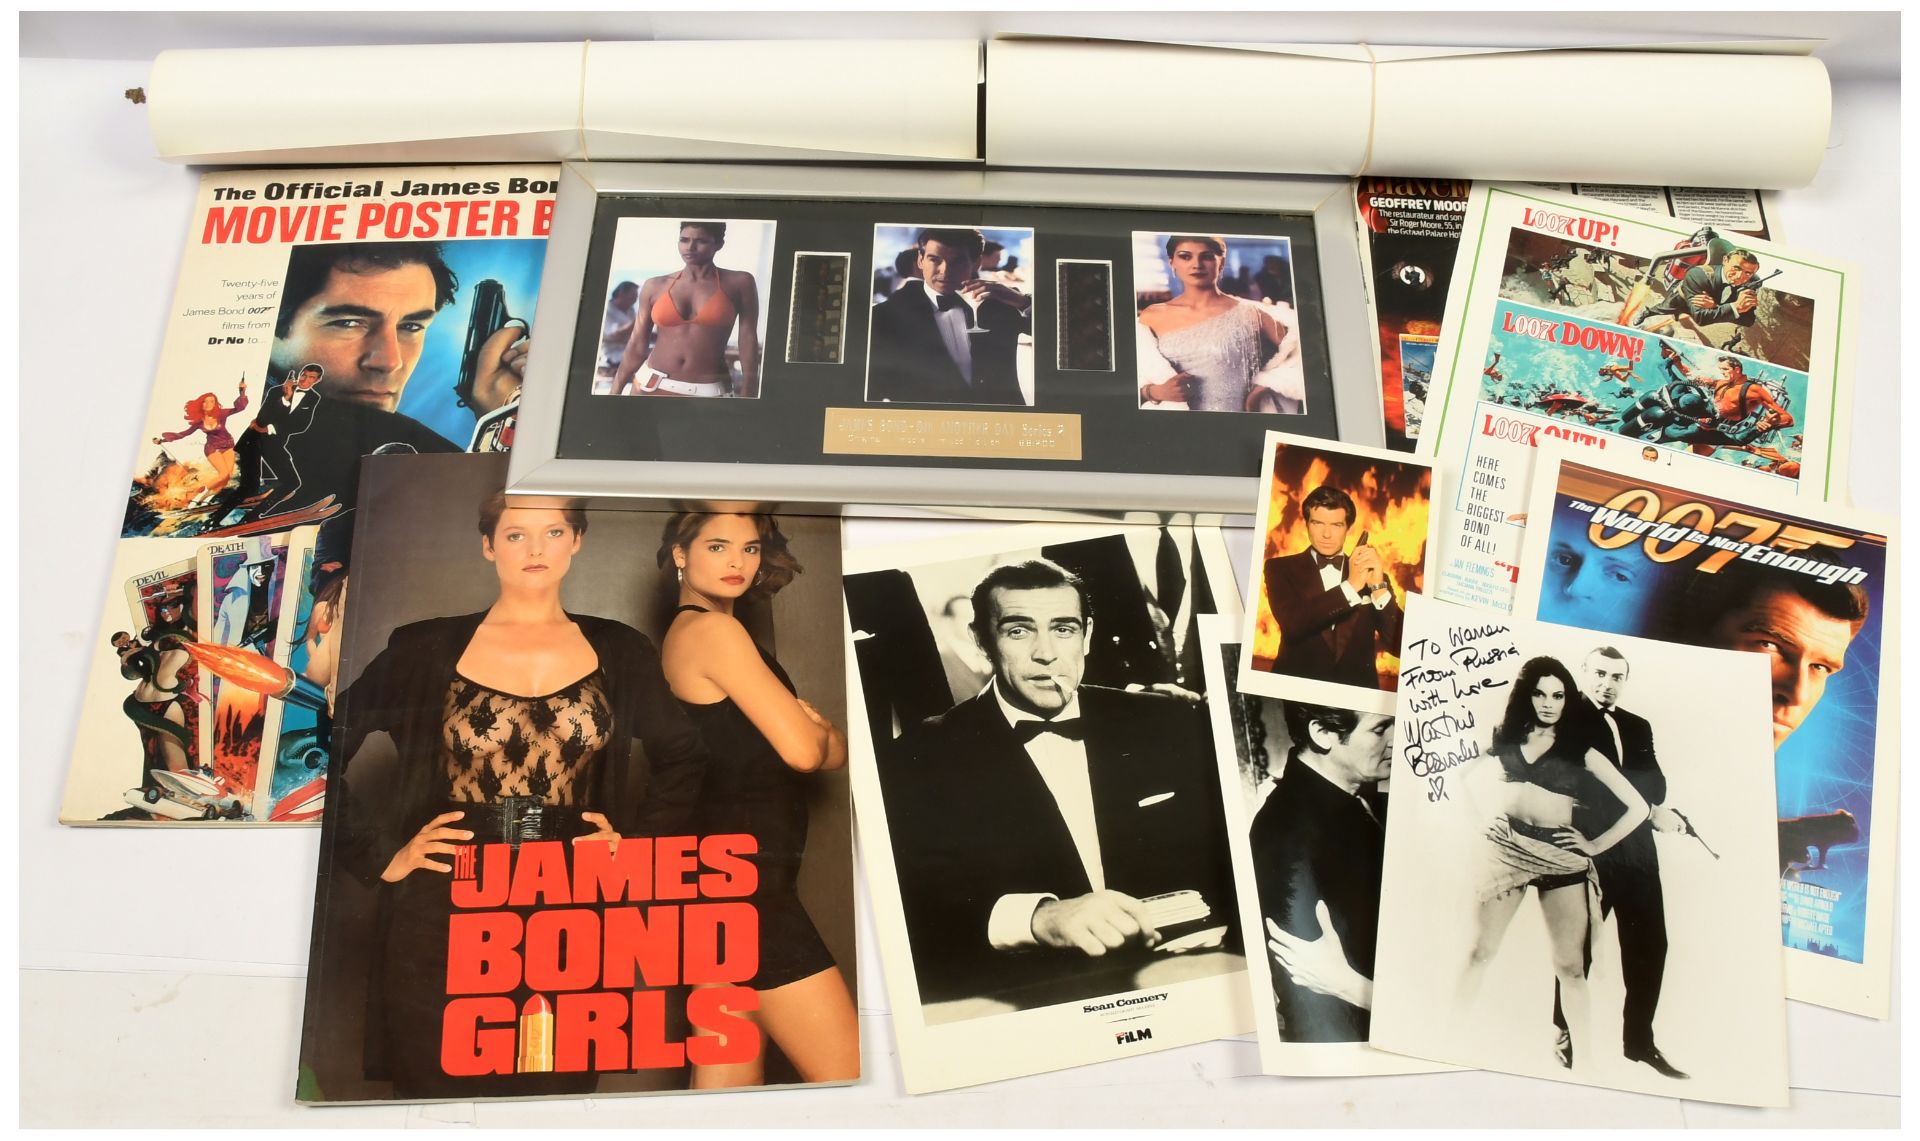 James Bond 007 related collectables